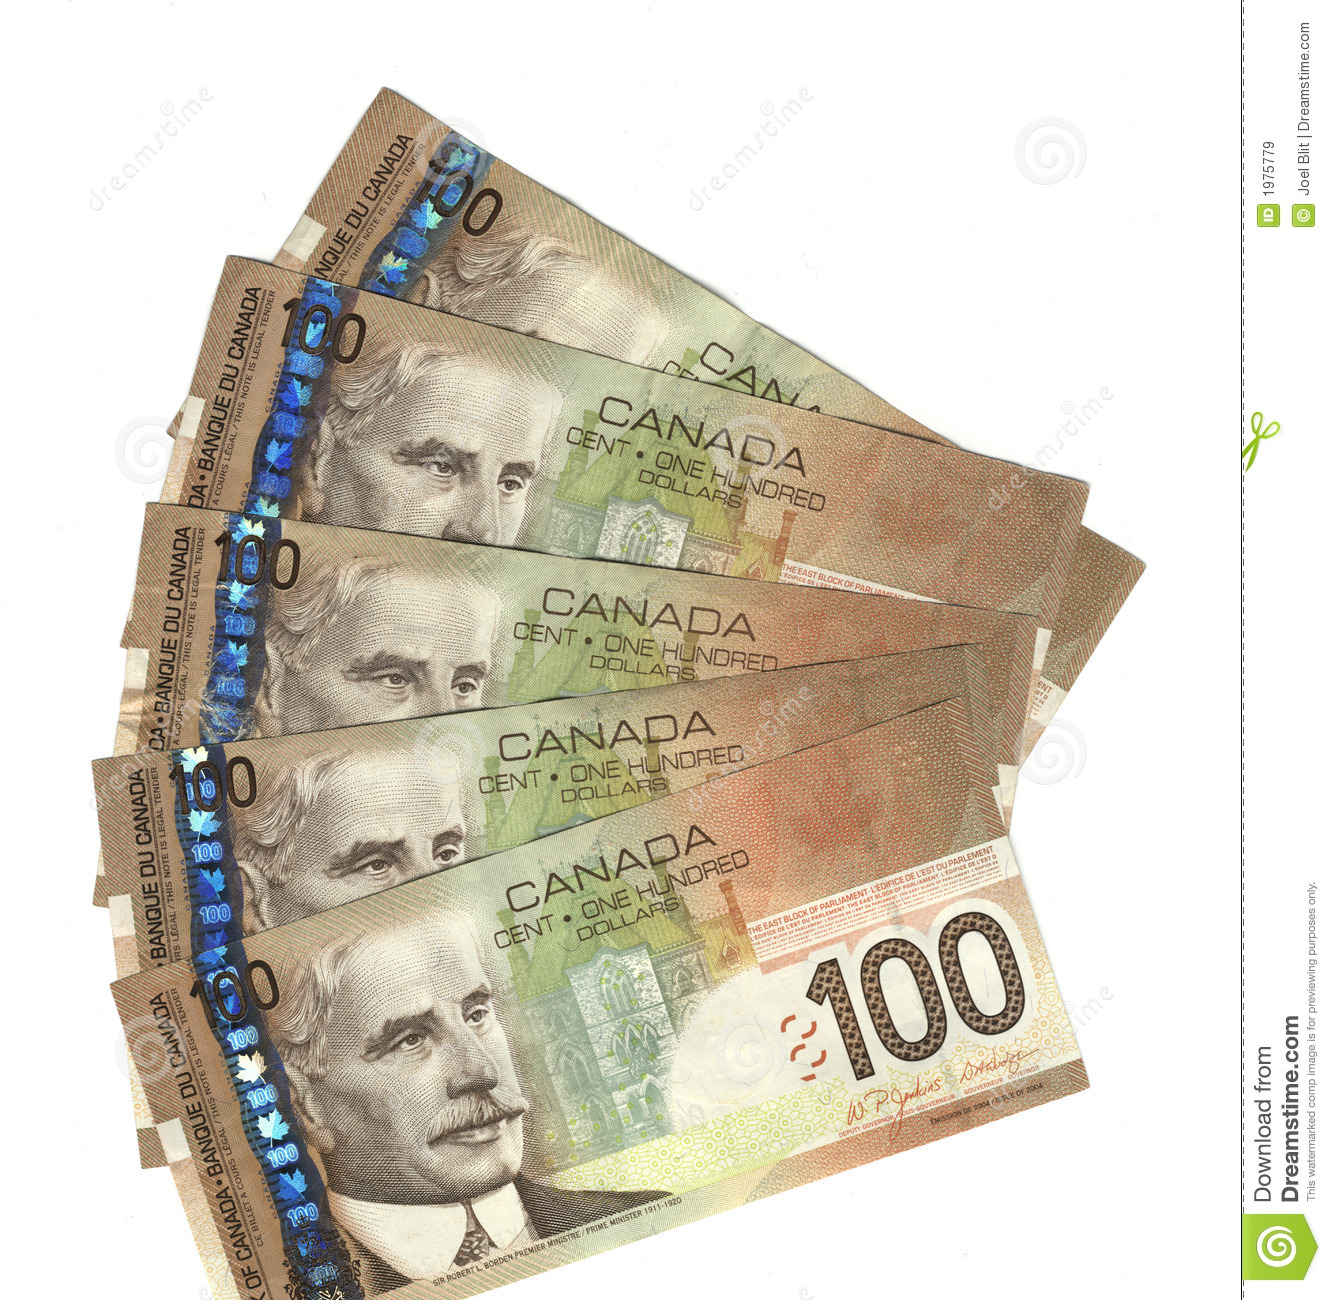 Fanned Out Canadian Hundred Dollar Bills Royalty Free Stock Images